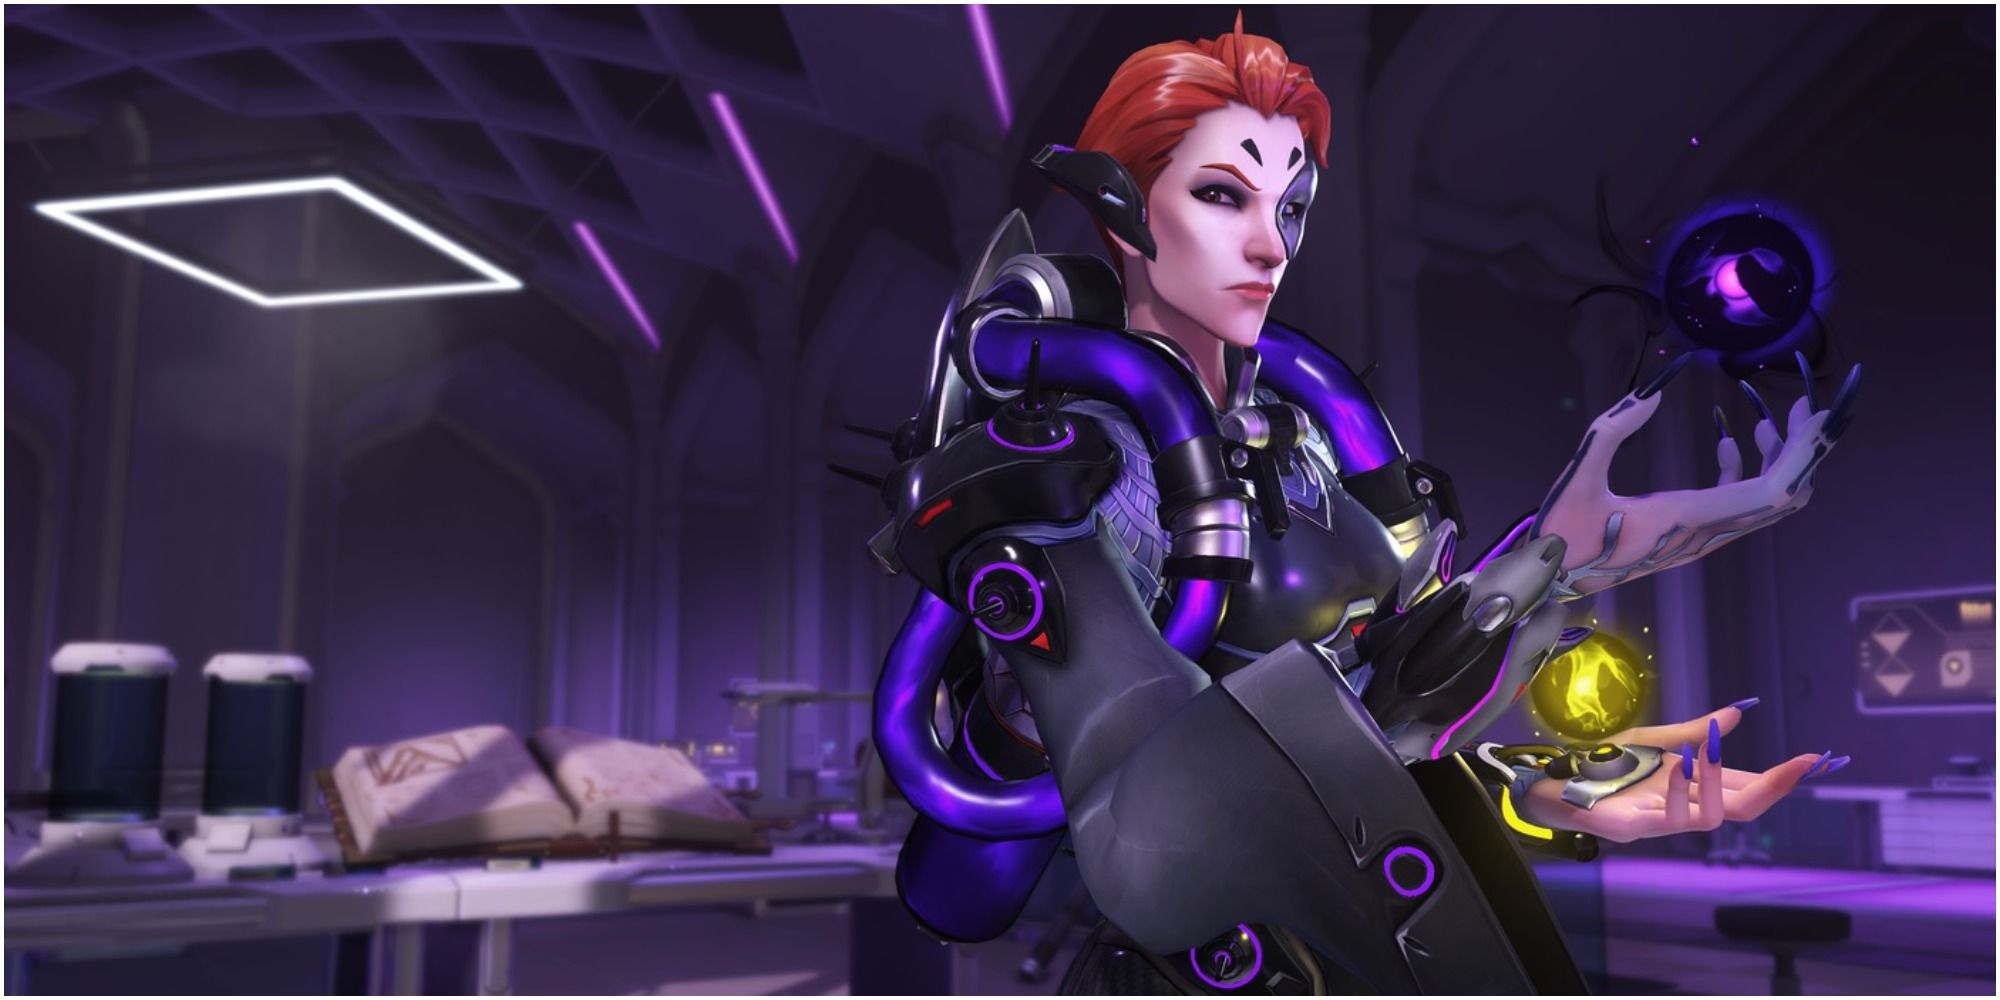 Moira in her lab in the game Overwatch